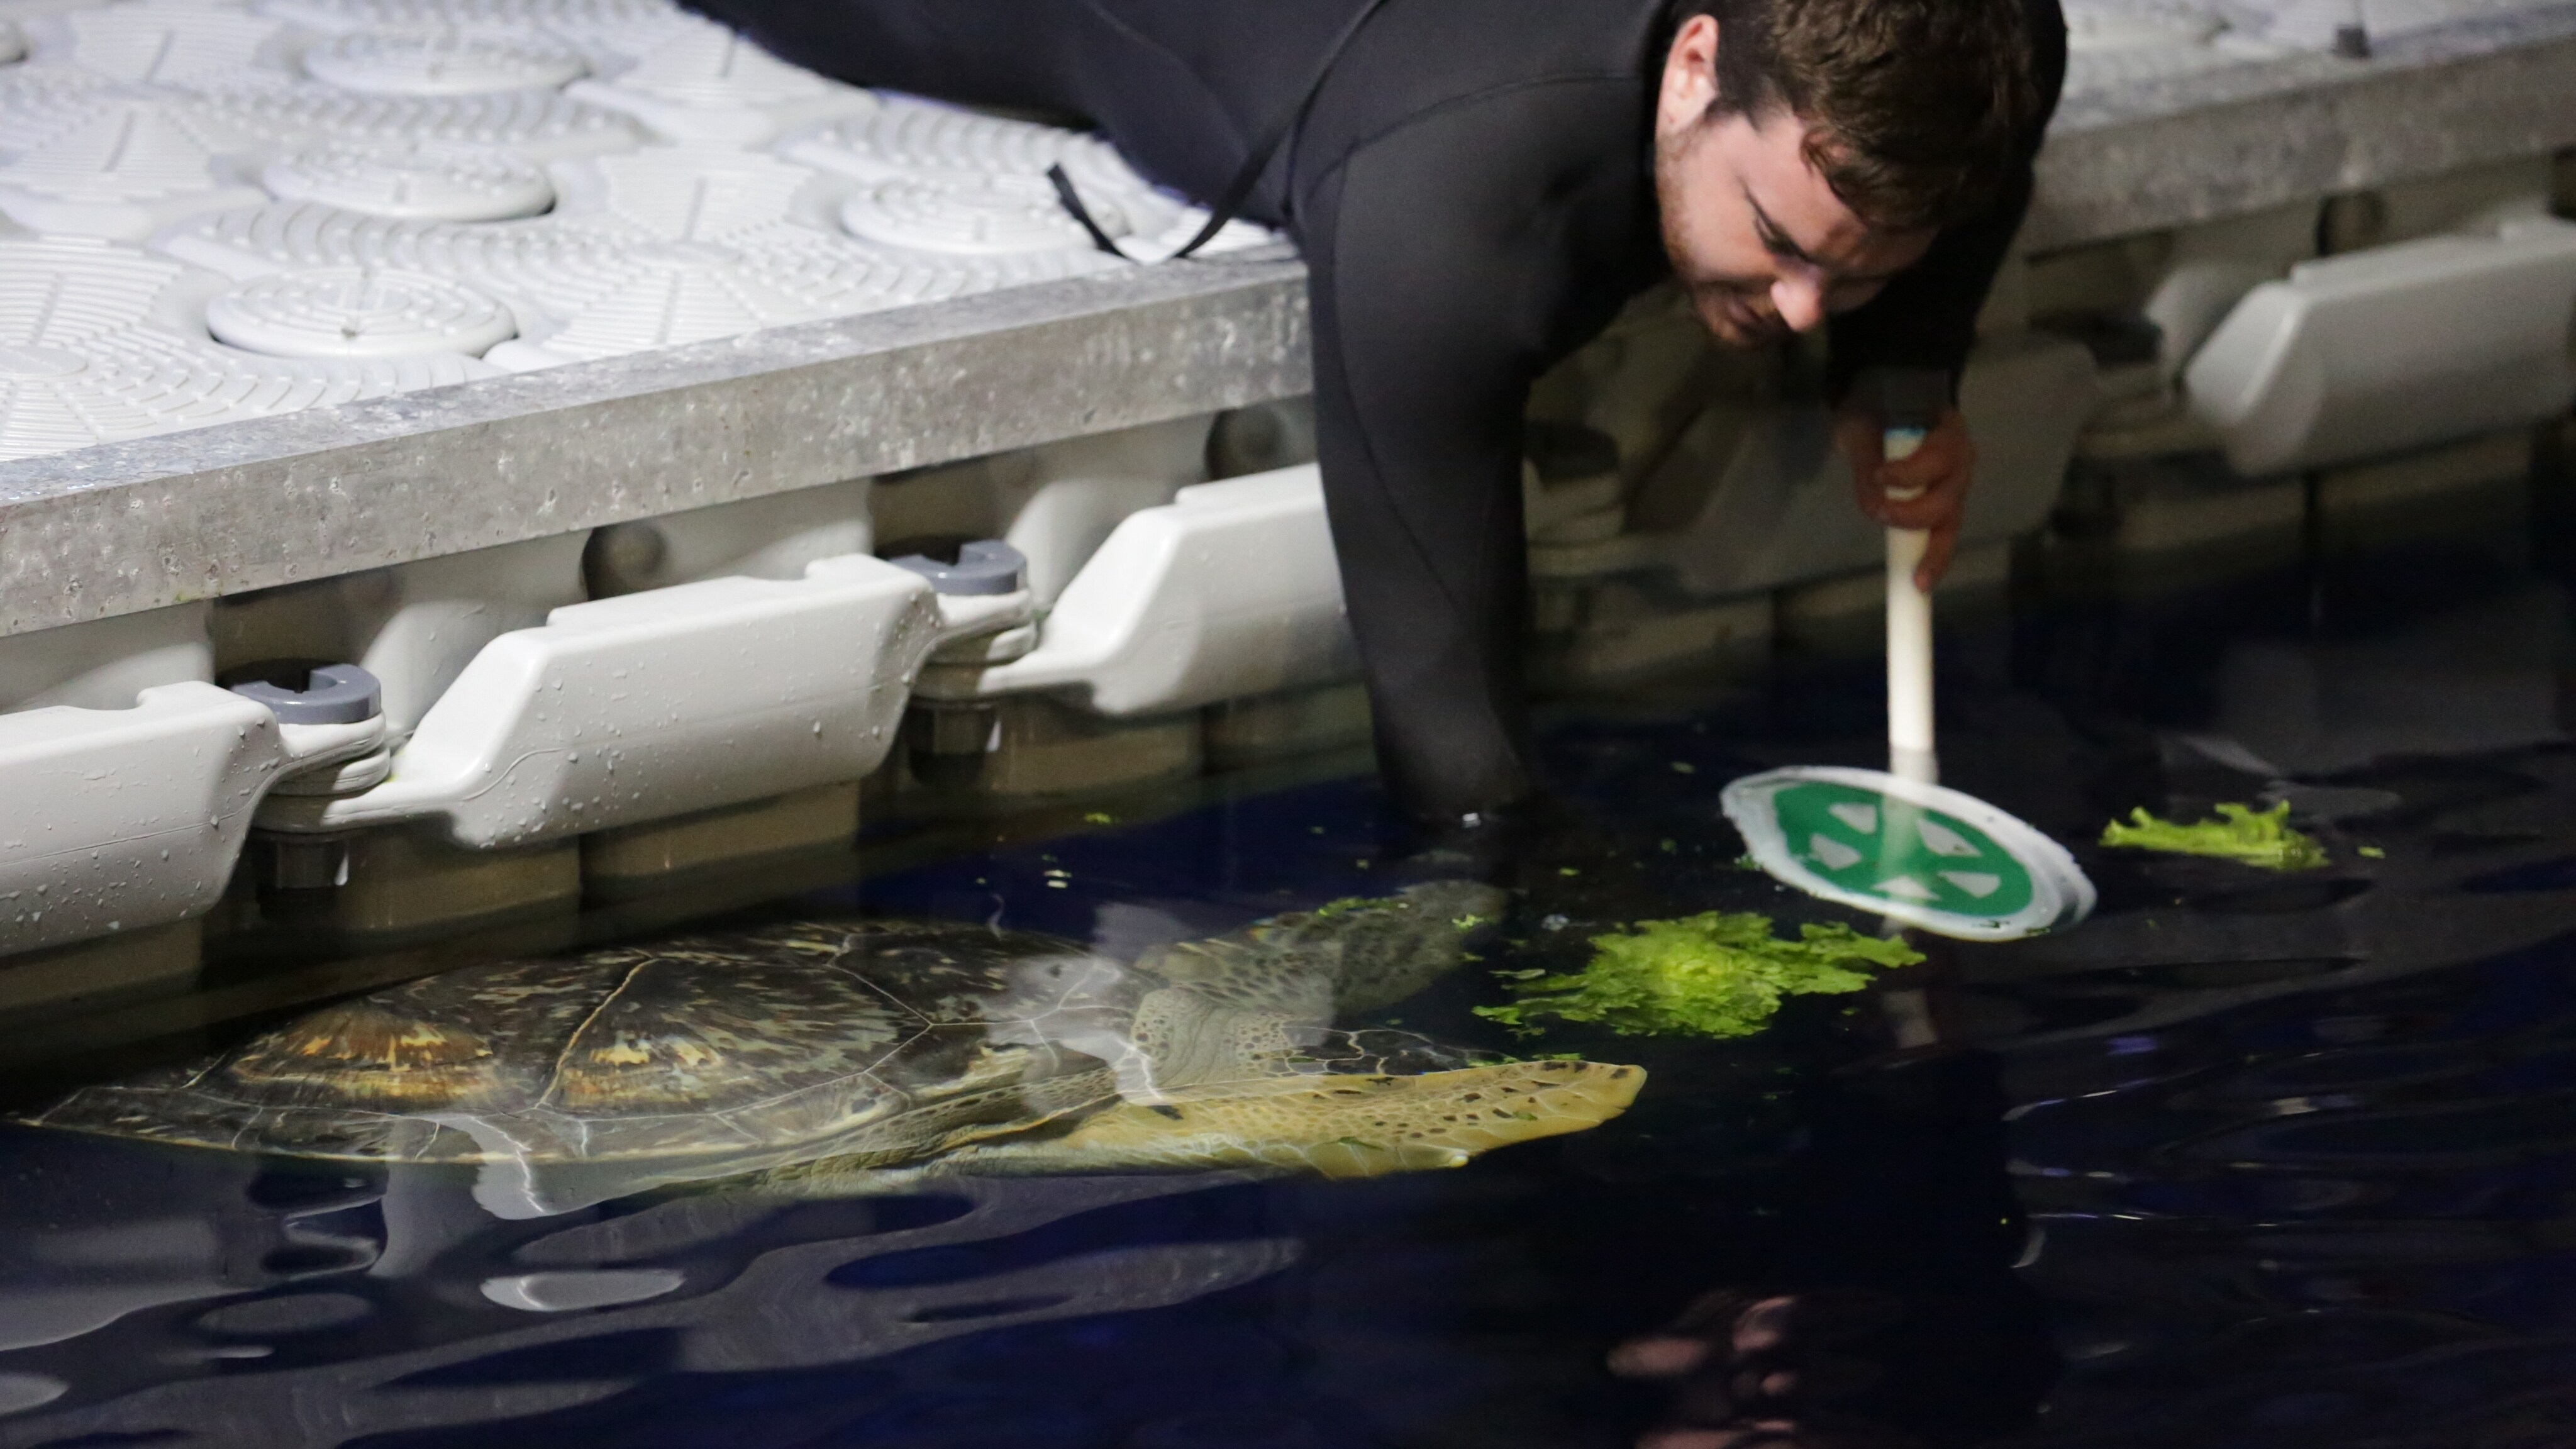 Aquarist Aaron Zigelsky trains Harry the Green Sea Turtle to respond to targets. (Disney)